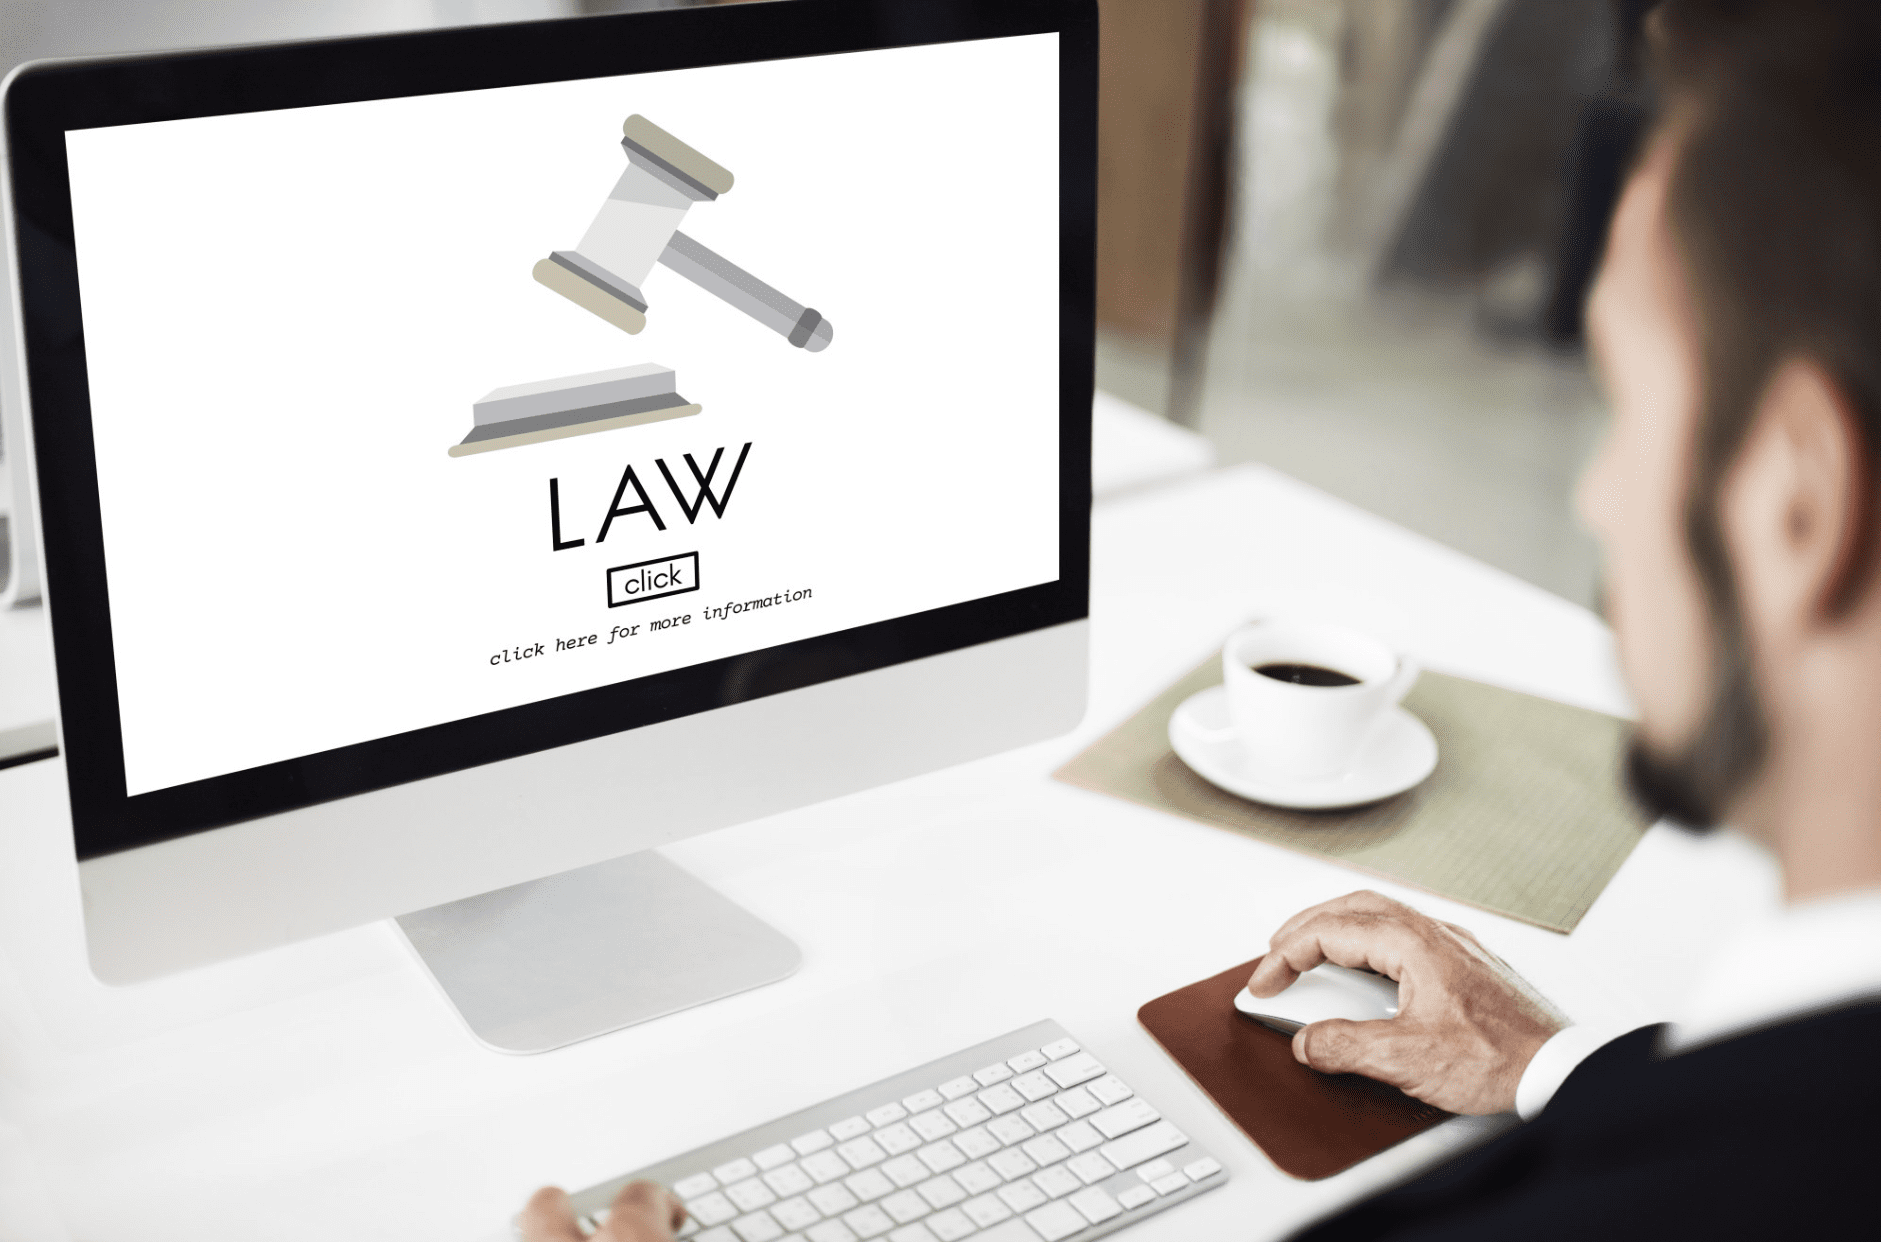 StrategyDriven Online Marketing and Website Development Article, Top 7 Factors to Consider When Building Law Firm Websites